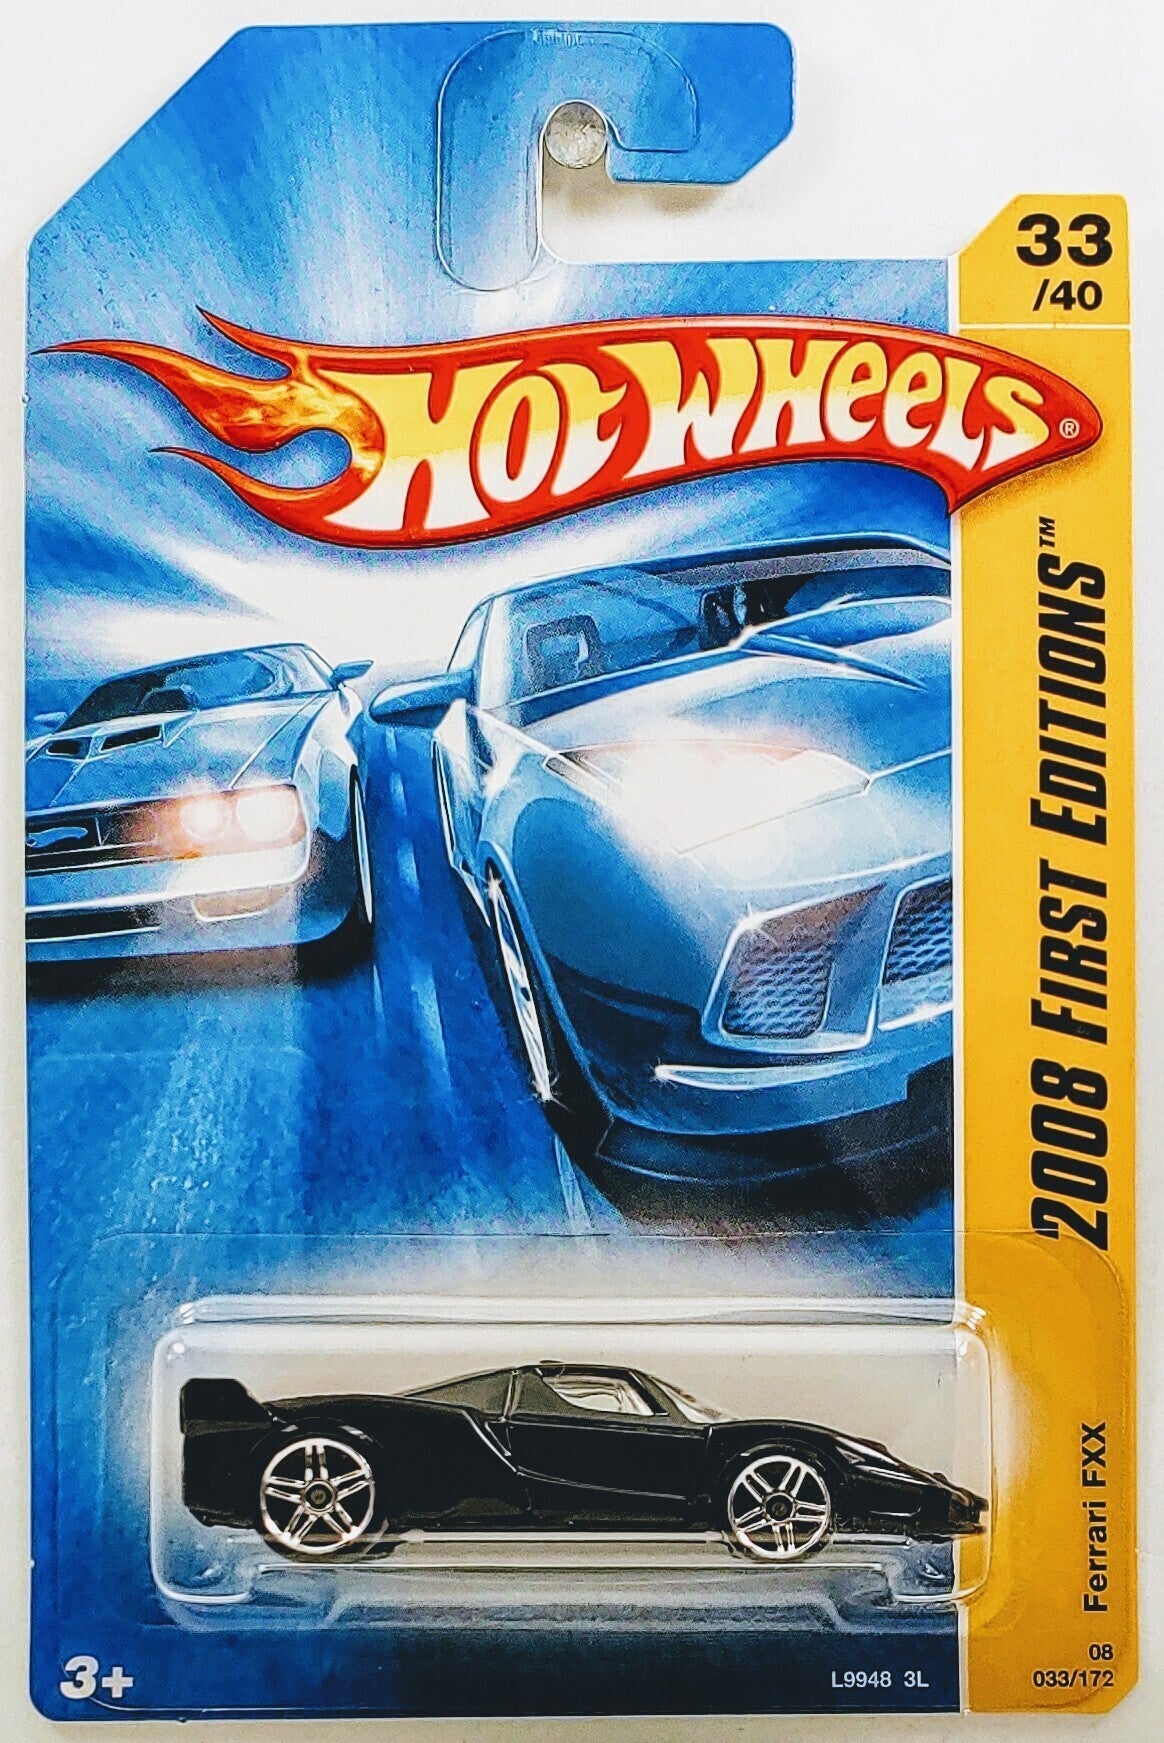 2008 hot wheels 40th ANNIVERSARY collectors convention newsletter